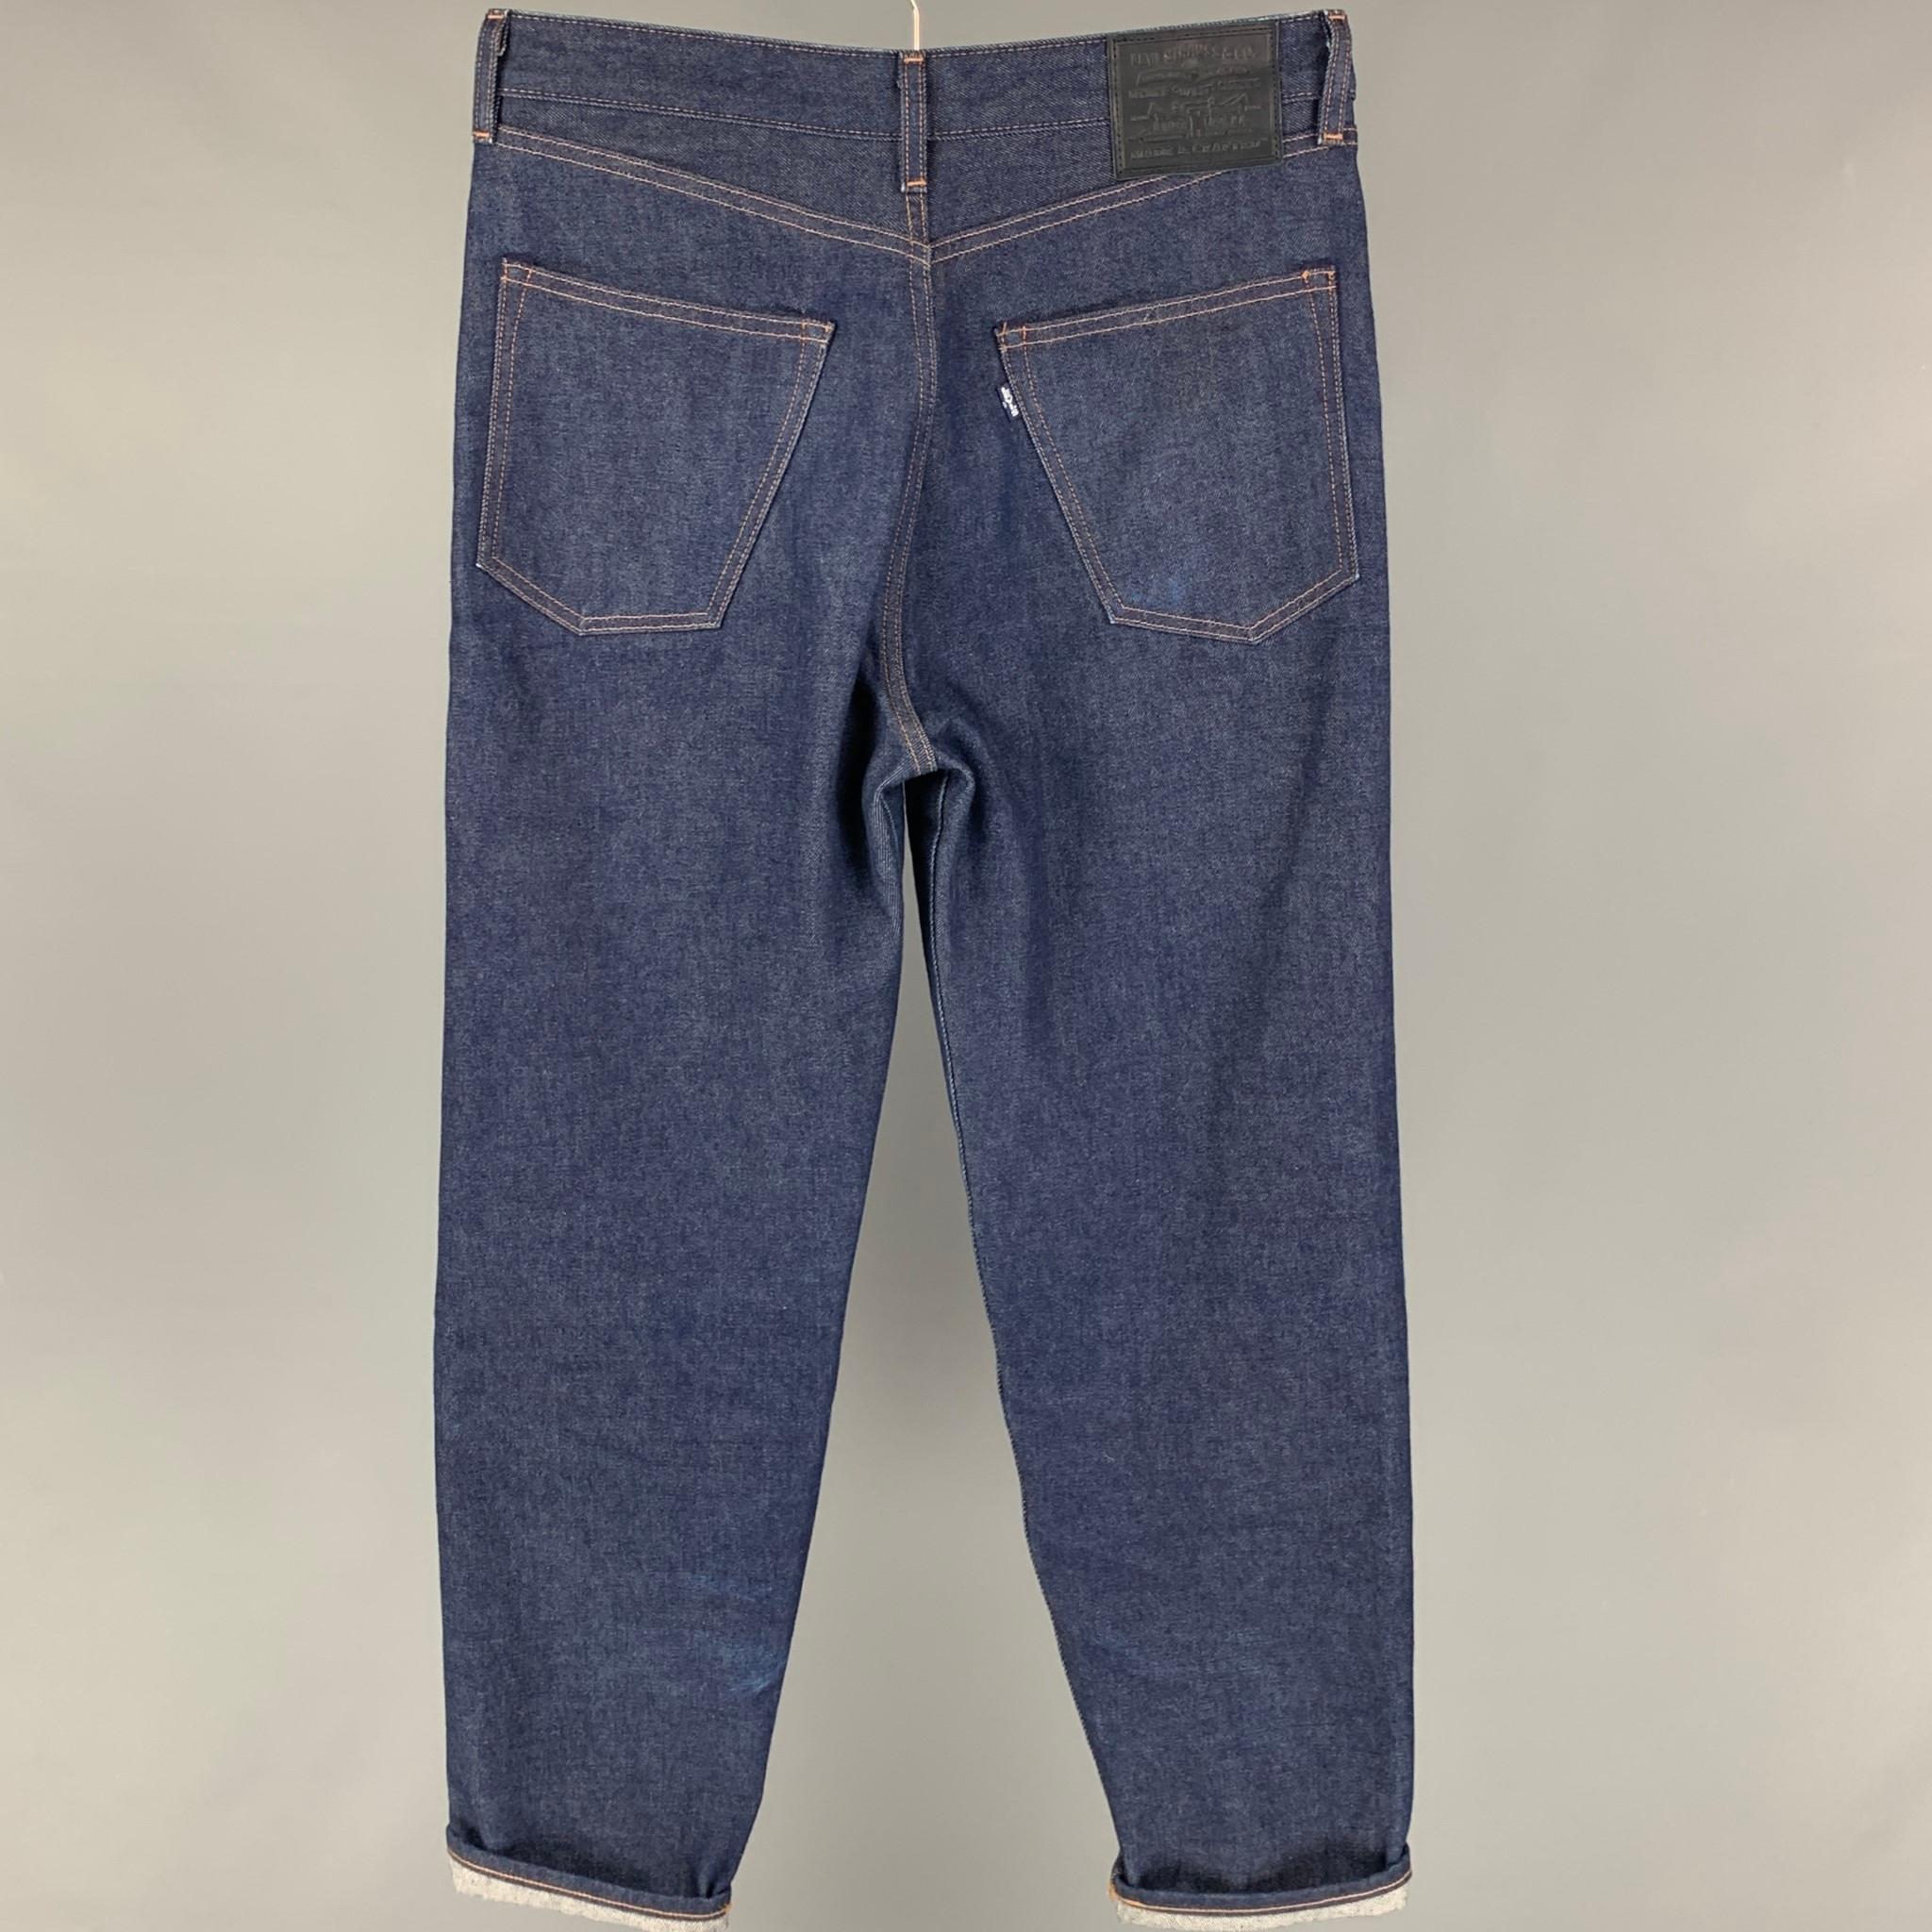 LEVI'S MADE & CRAFTED jeans comes in a indigo selvedge denim featuring a high waisted style, contrast stitching, and a zip fly closure. 

Very Good Pre-Owned Condition.
Marked: 32/32

Measurements:

Waist: 32 in.
Rise: 13 in.
Inseam: 29 in. 